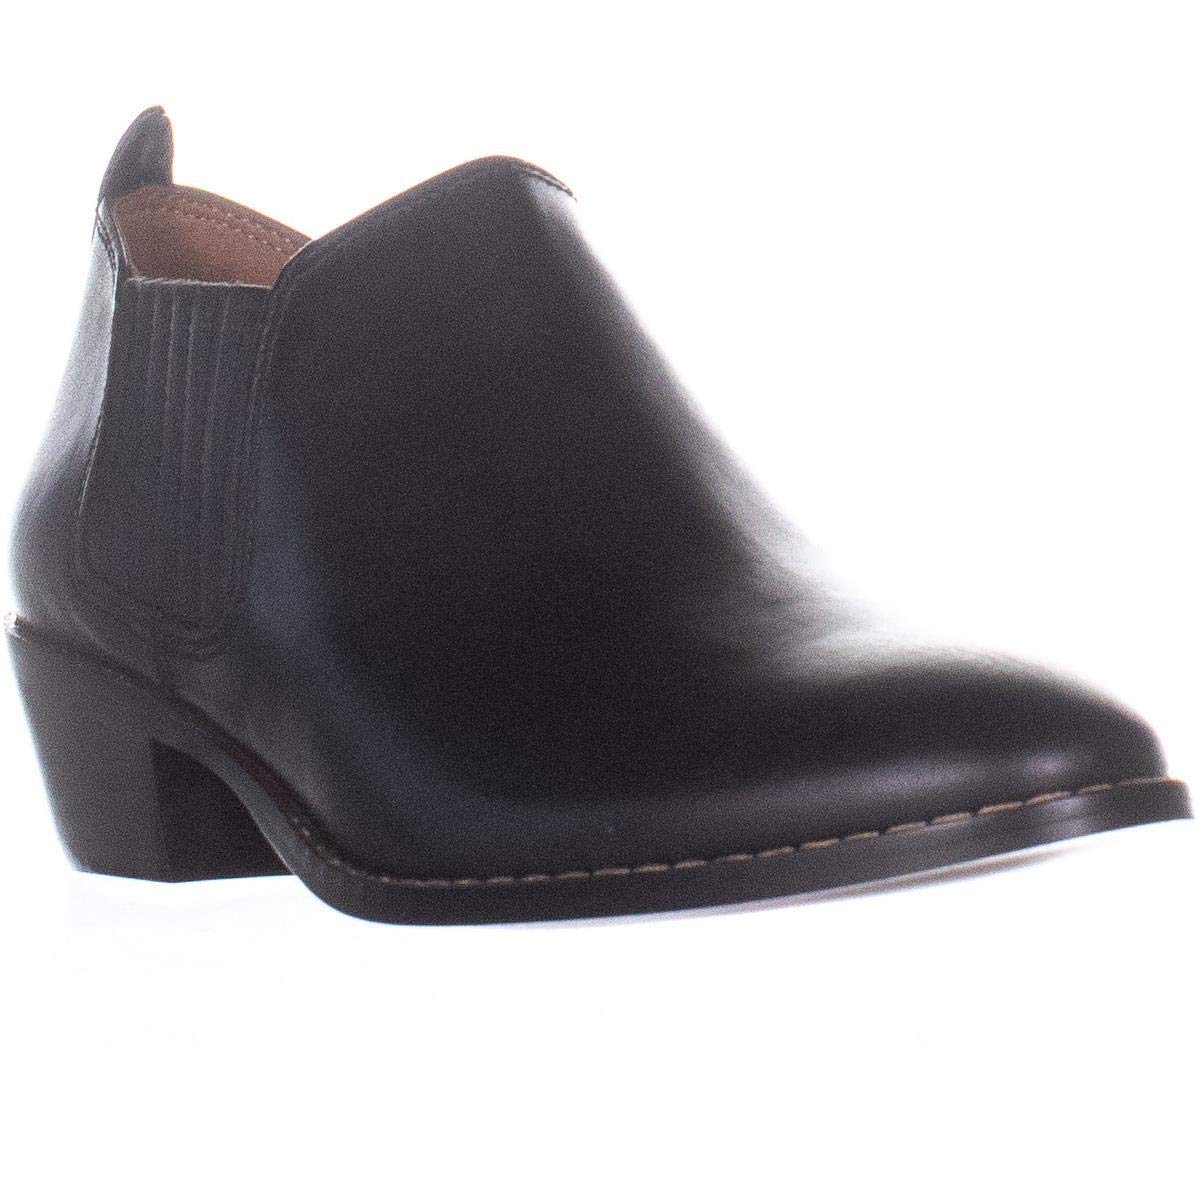 Coach Womens Devin Pointed Toe Ankle Fashion Boots, Black Leather, Size ...